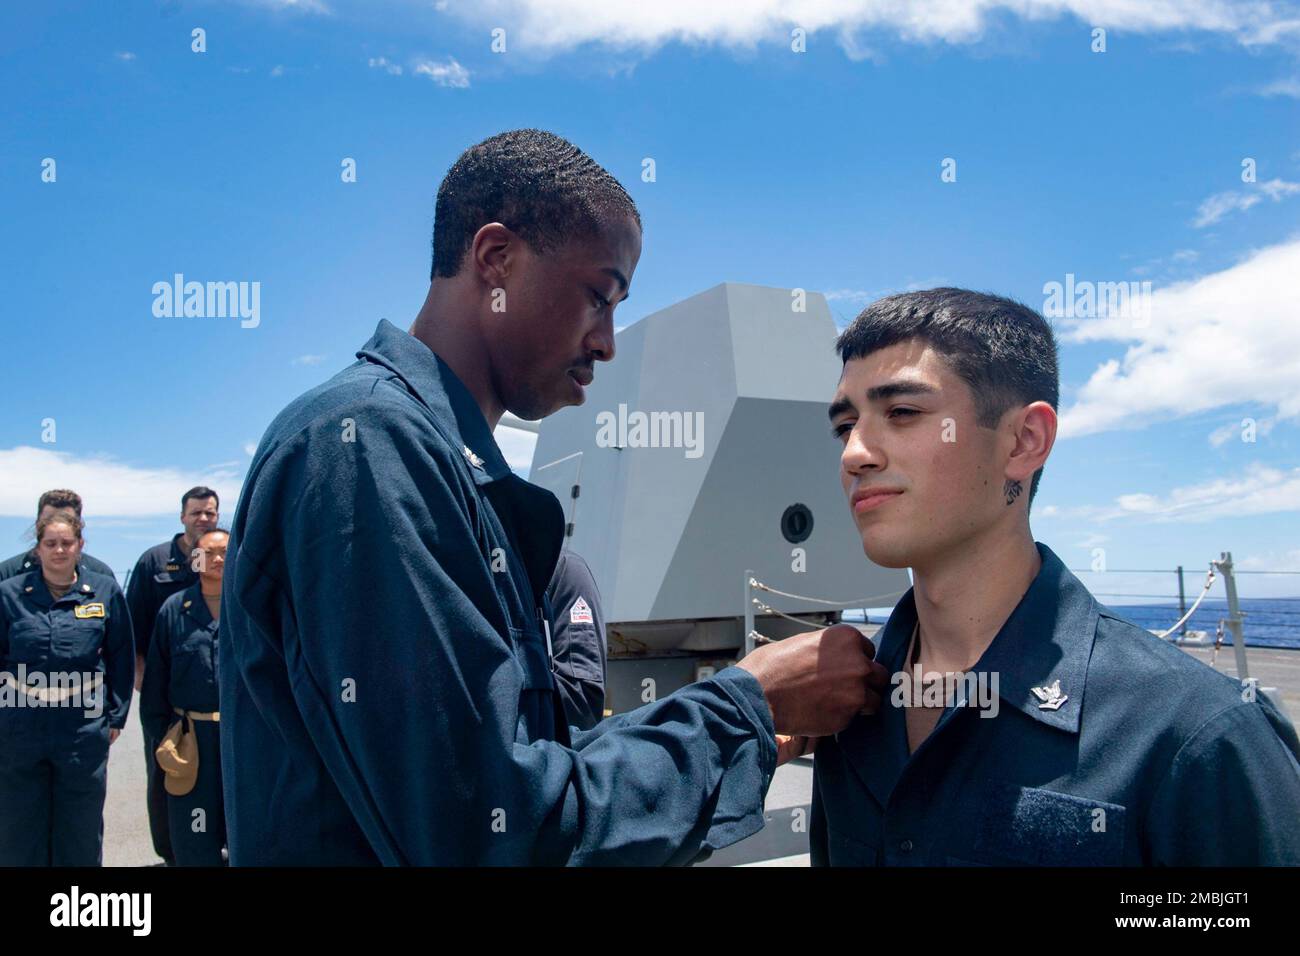 PHILIPPINE SEA (June 16, 2022) Gunner’s Mate 3rd Class Joel Ramirez, right, from Modesto, Calif., receives his petty officer 3rd class collar device on the forecastle of the Arleigh Burke-class guided-missile destroyer USS Spruance (DDG 111). Abraham Lincoln Strike Group is on a scheduled deployment in the U.S. 7th Fleet area of operations to enhance interoperability through alliances and partnerships while serving as a ready-response force in support of a free and open Indo-Pacific region. Stock Photo